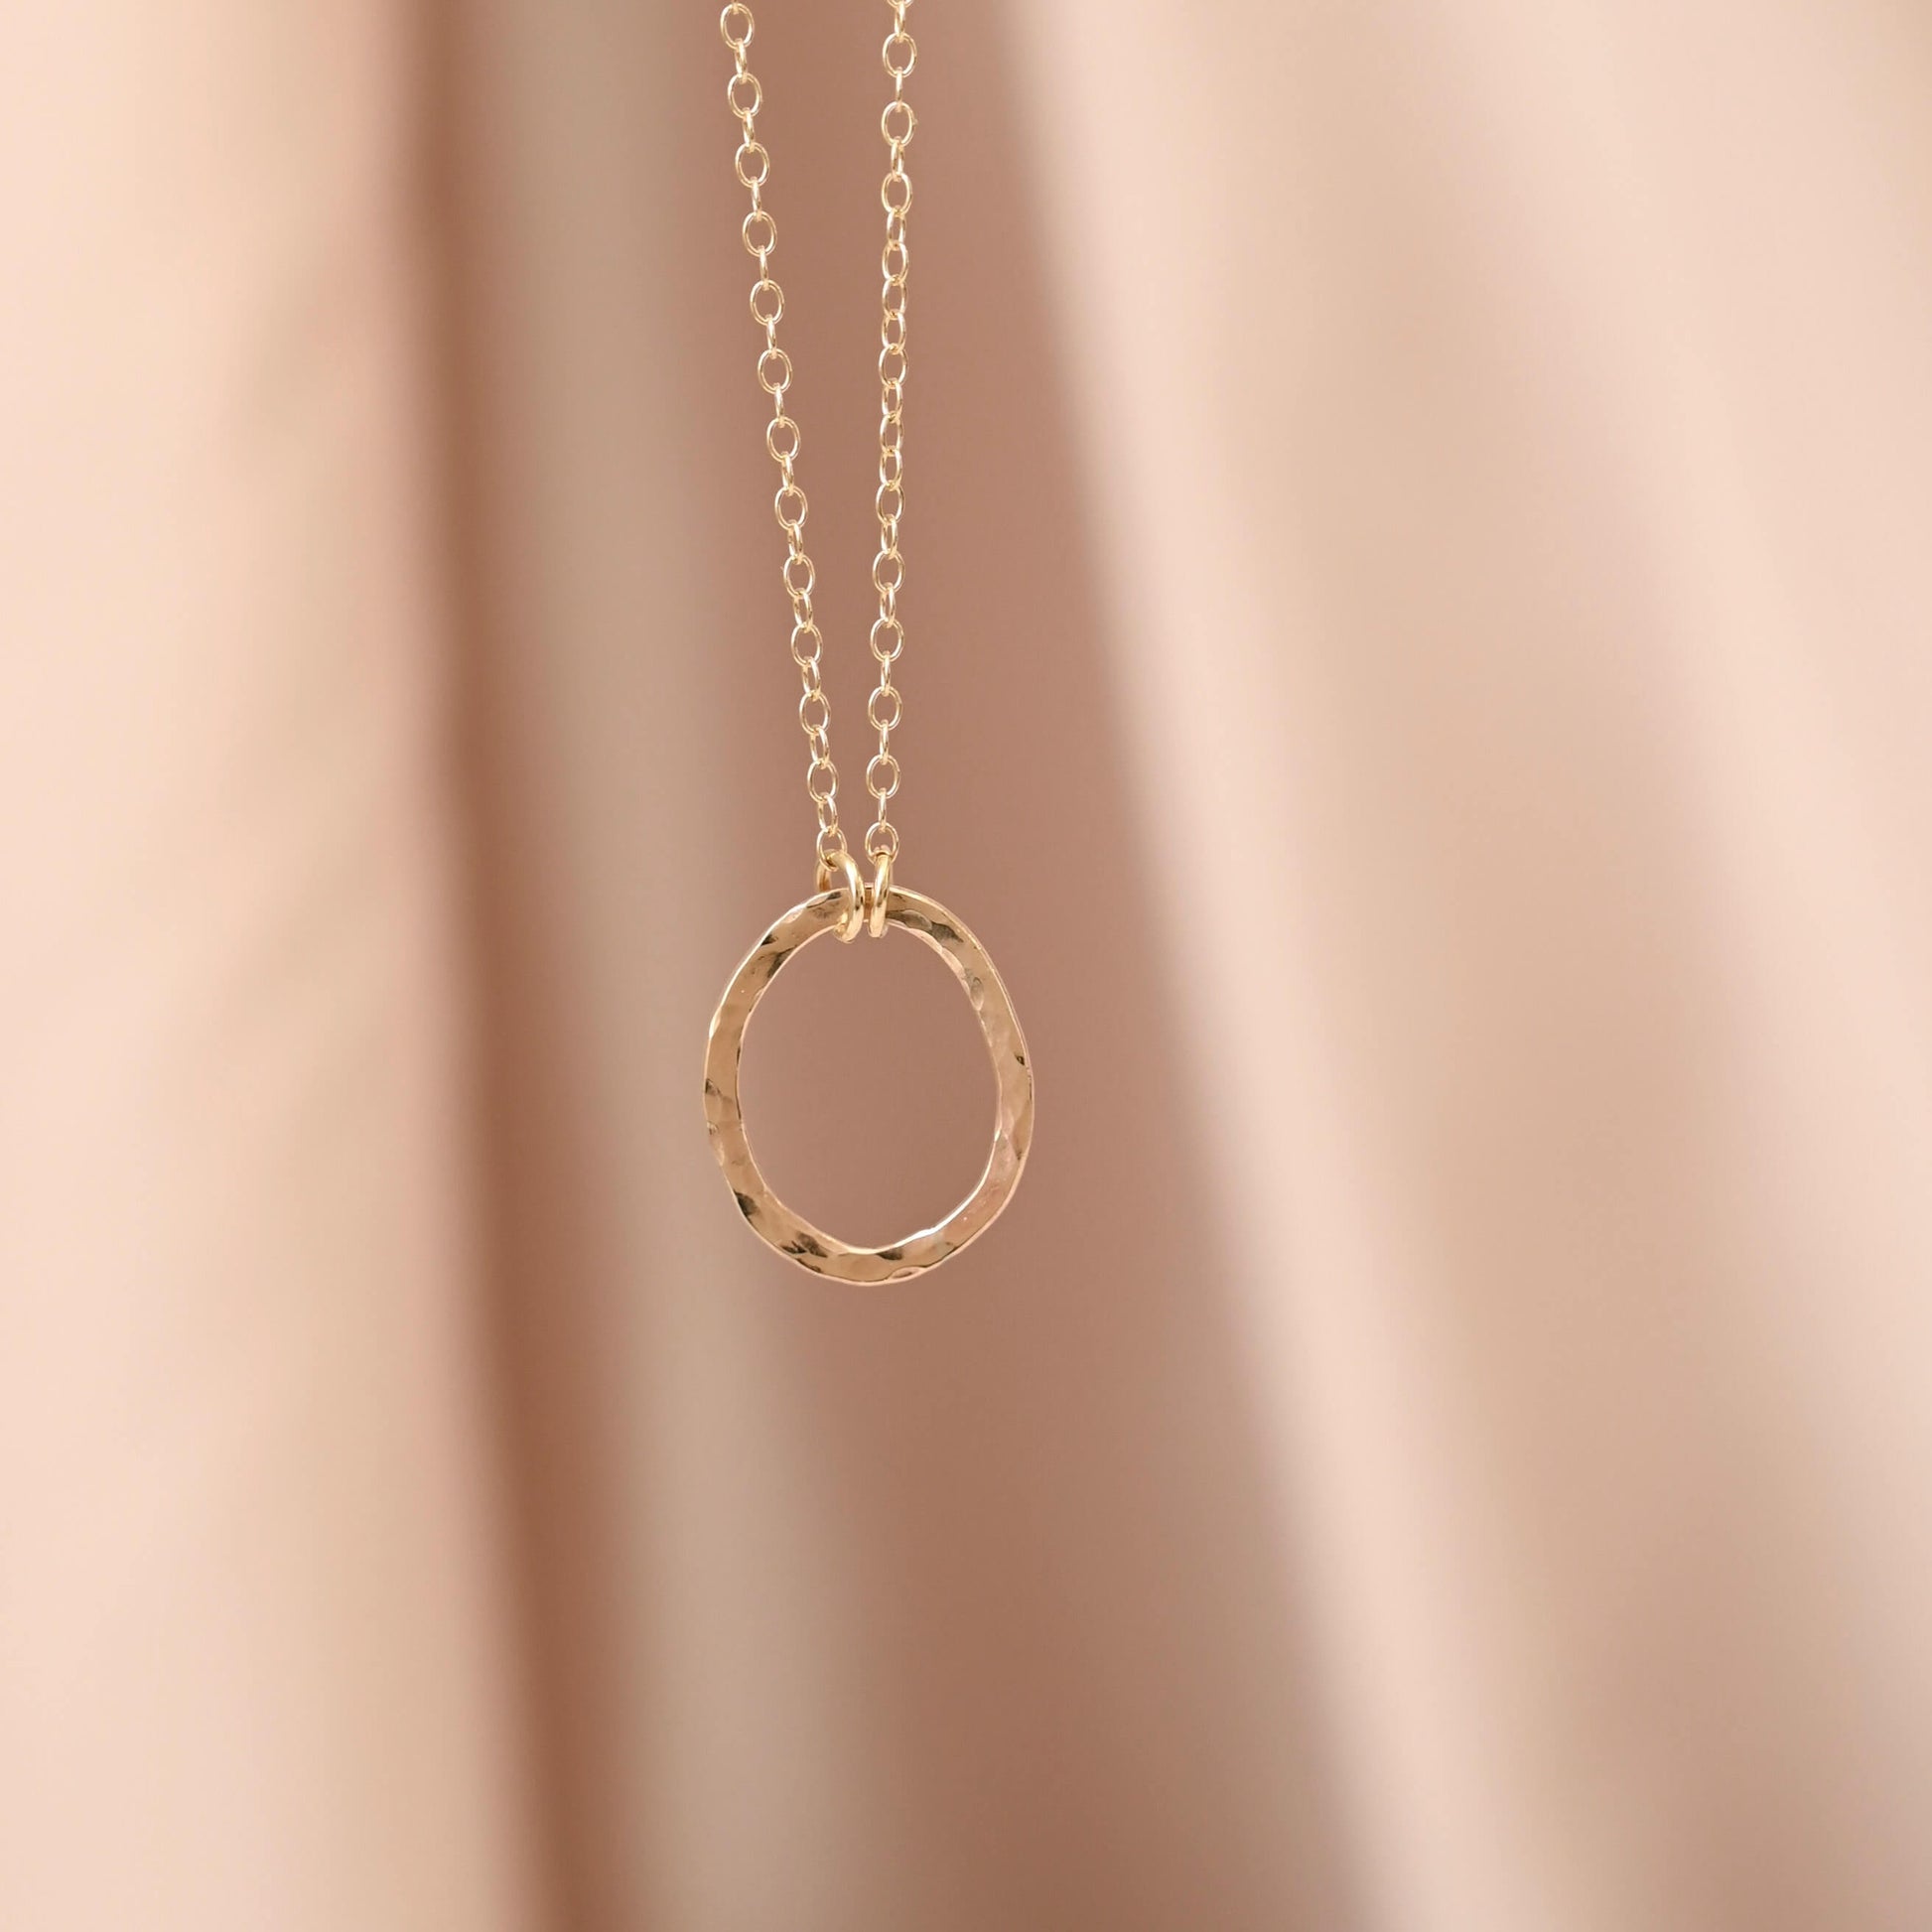 Hammered Gold Oval Pendant - Drumgreenagh Ethical Jewellery